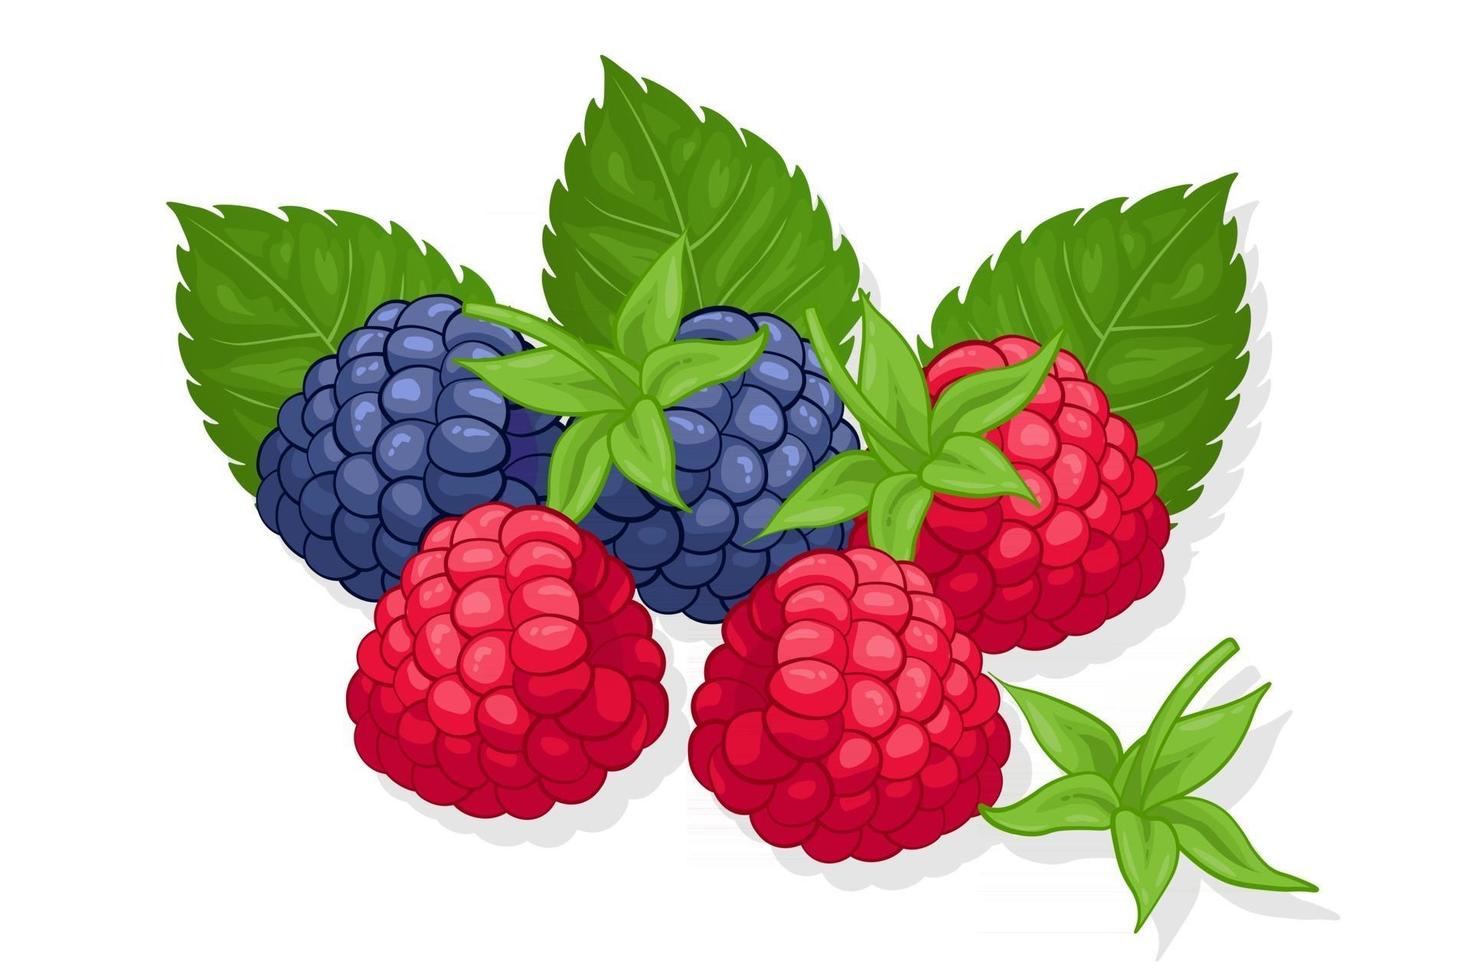 Raspberry and blackberry sweet fruit illustration for web isolated on white background vector